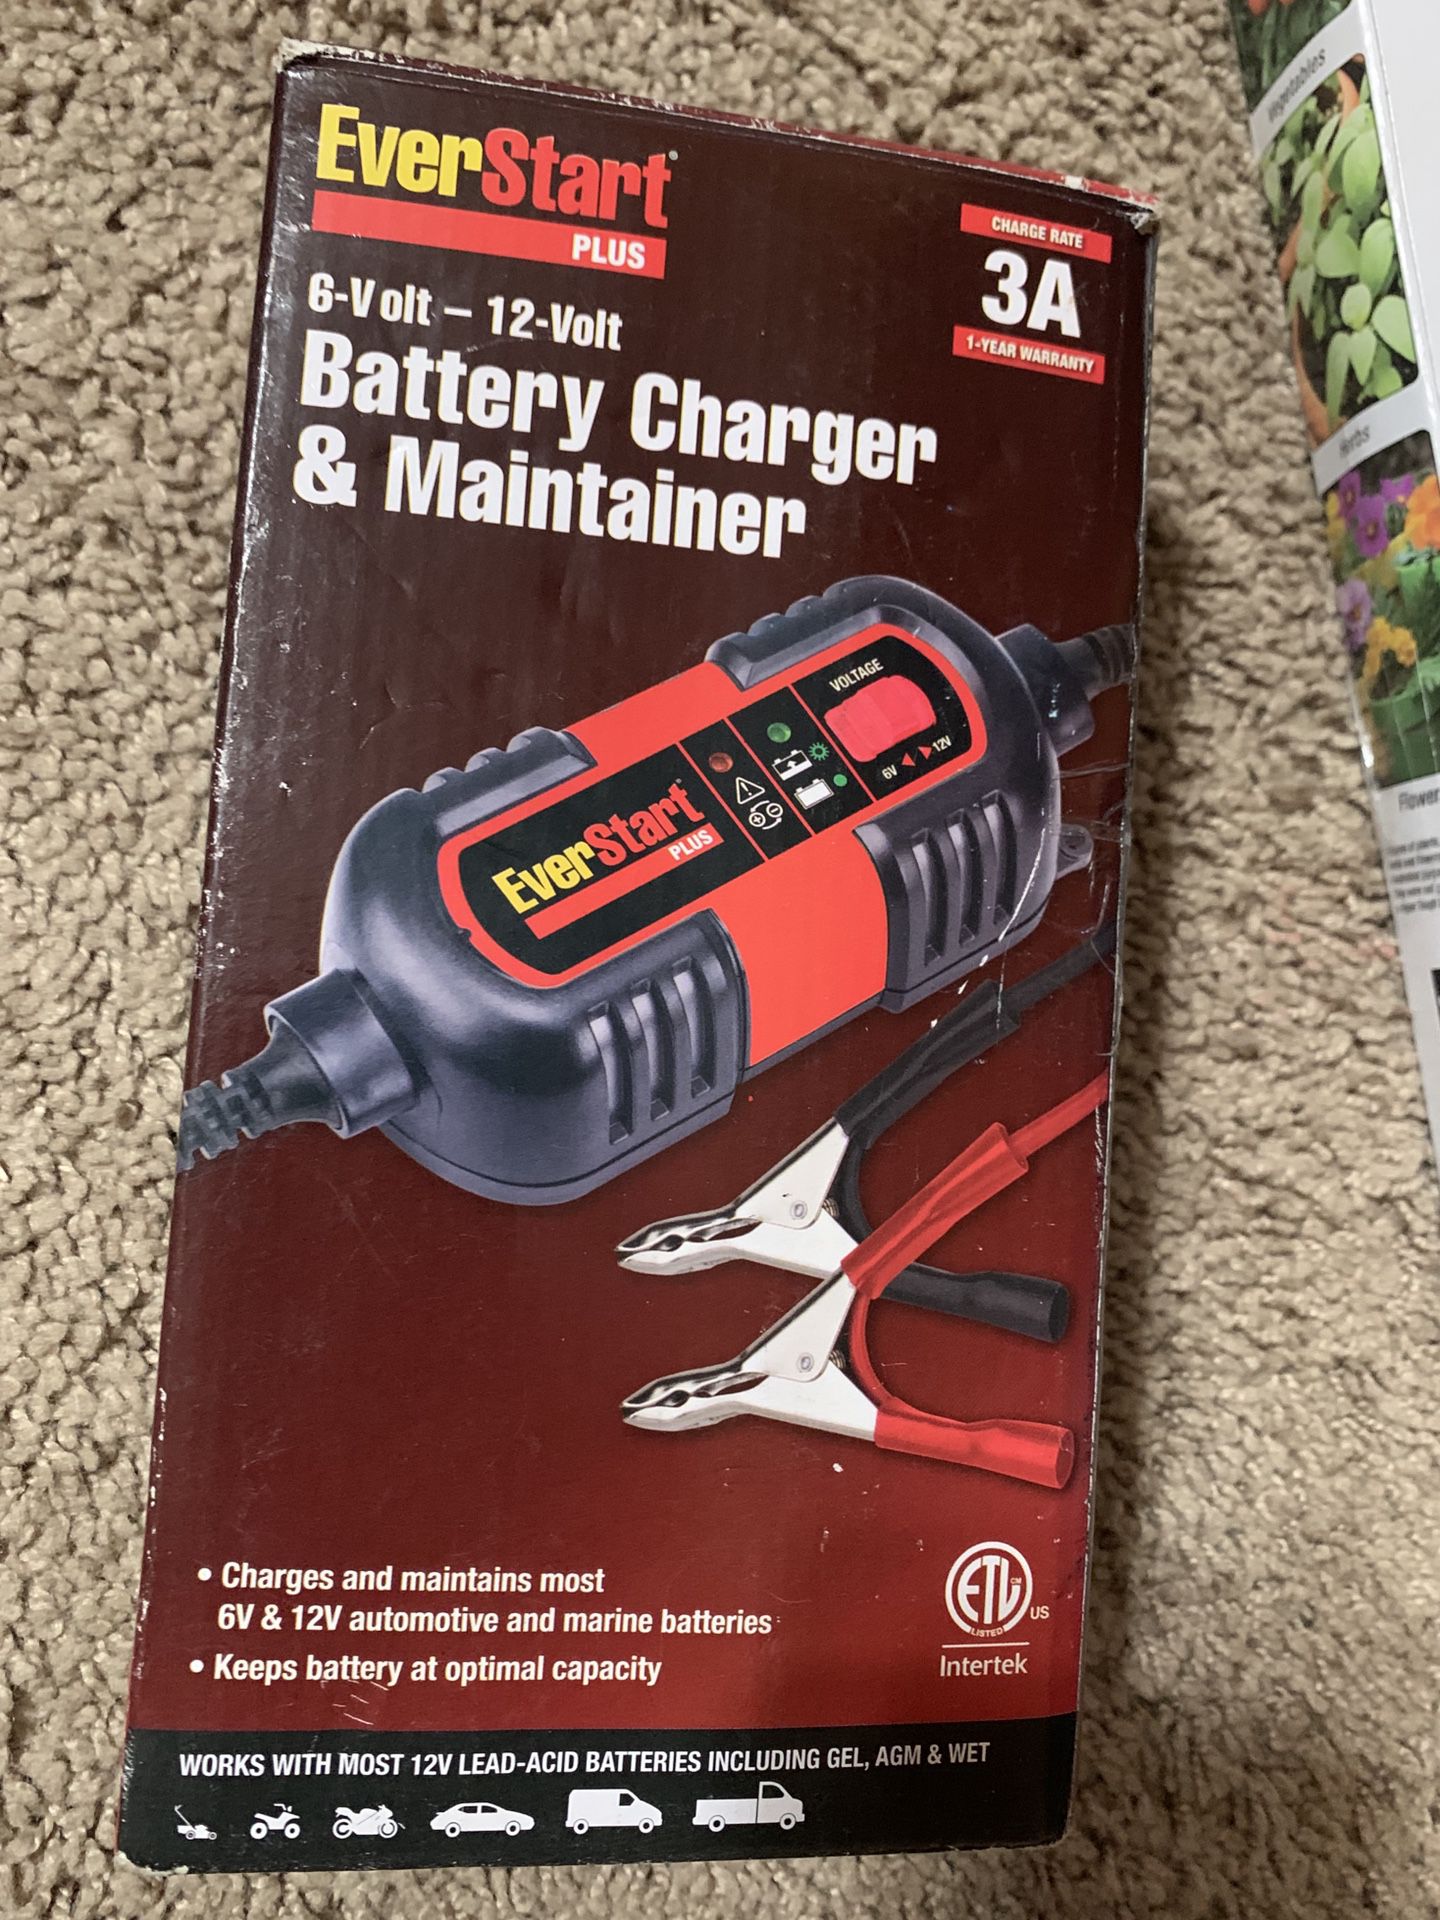 Battery charger and maintainer for cars, motorbikes, vans, trucks etc. MAKE ME OFFERS